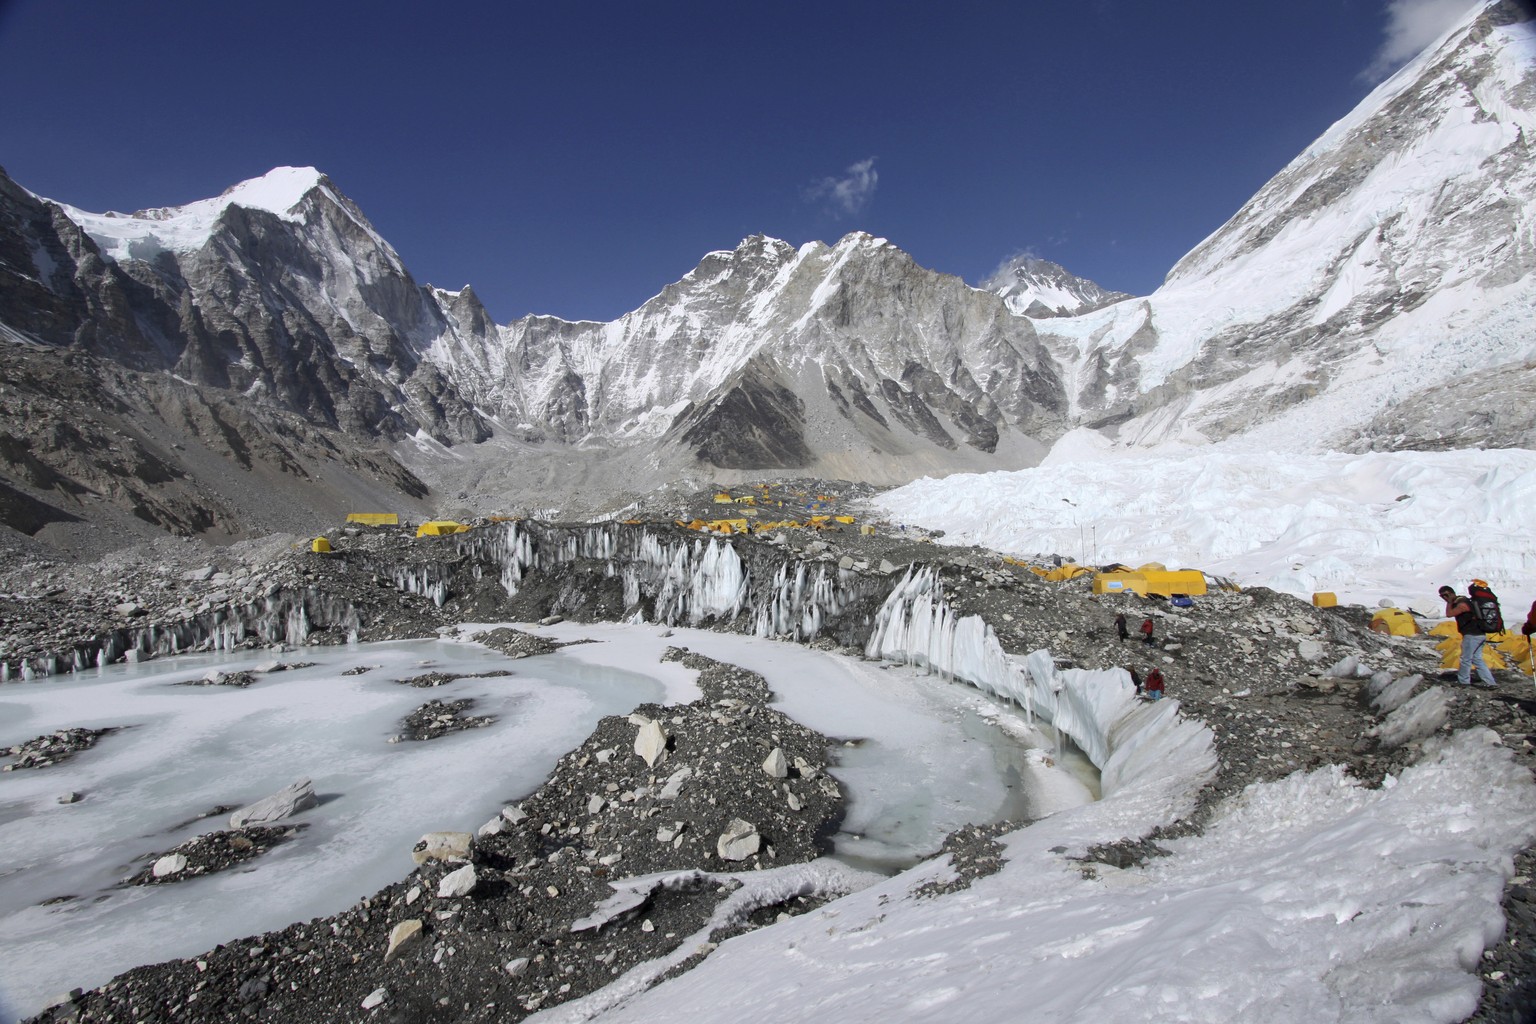 FILE - In this April 11, 2015 file photo, tents are seen set up for climbers on the Khumbu Glacier, with Mount Khumbutse, center, and Khumbu Icefall, right, seen in background, at Everest Base Camp in ...